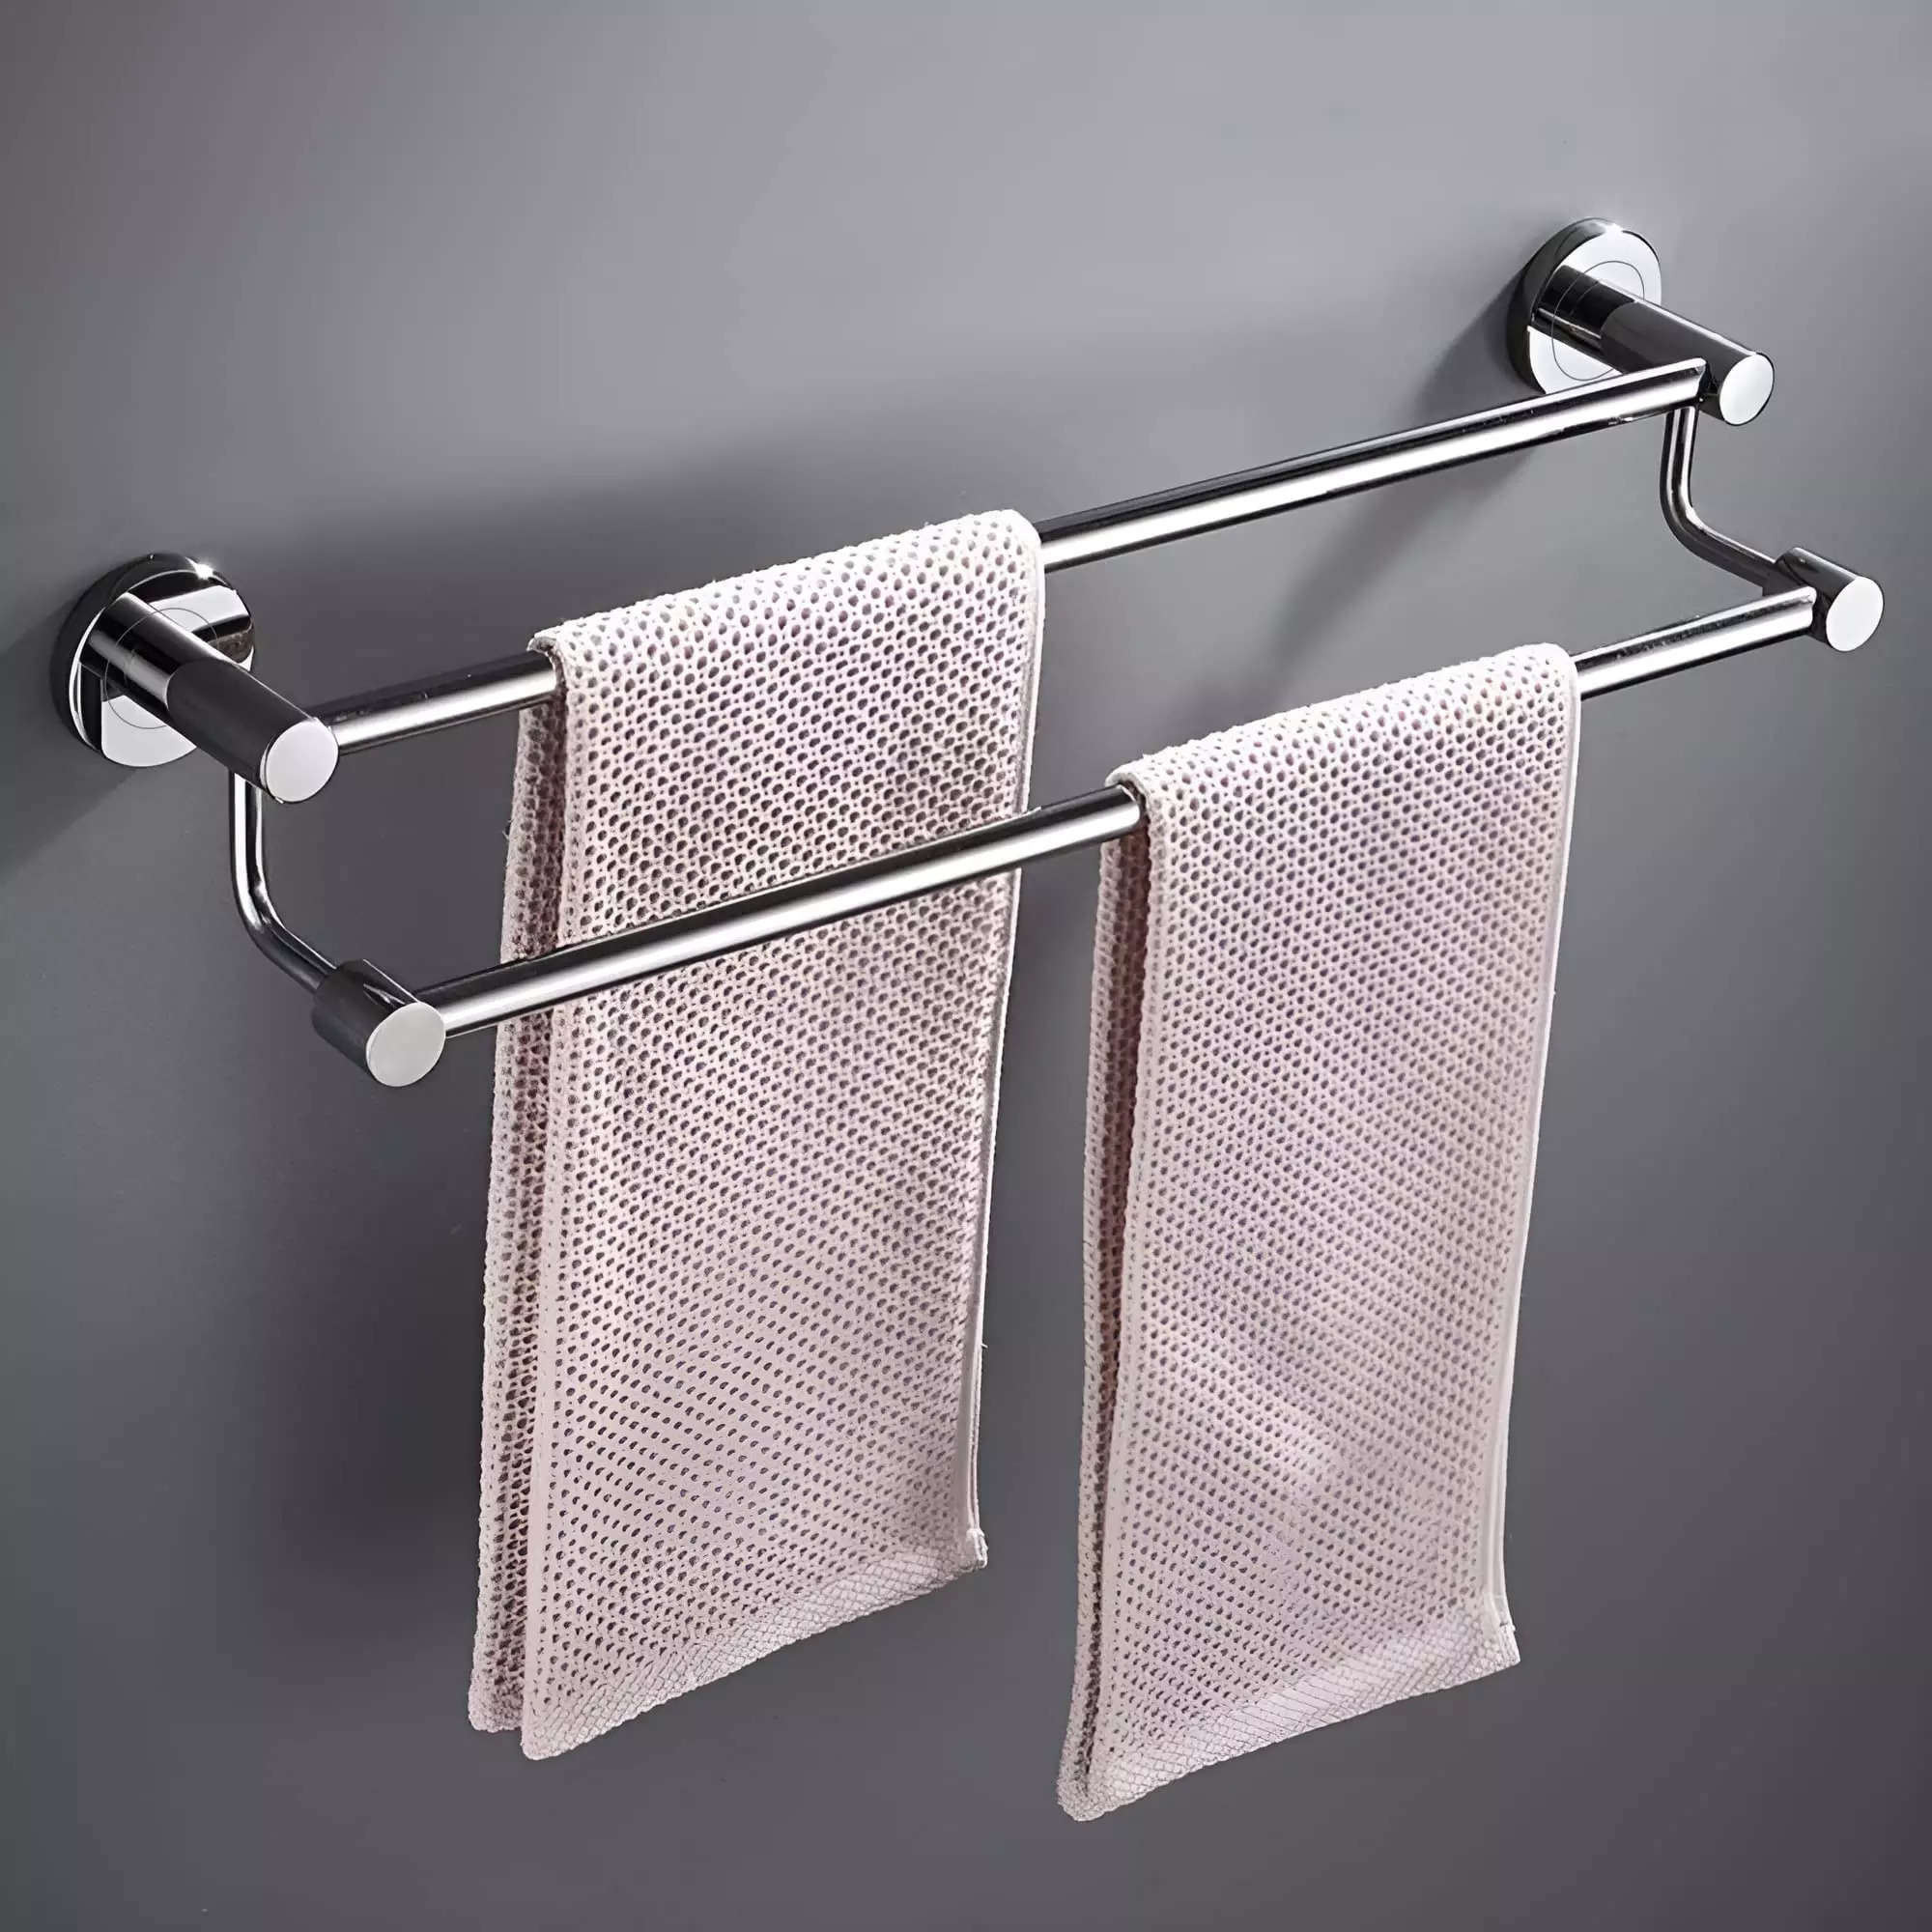 Best towel bars under 3000: Stylish and functional solutions for every bathroom:Image